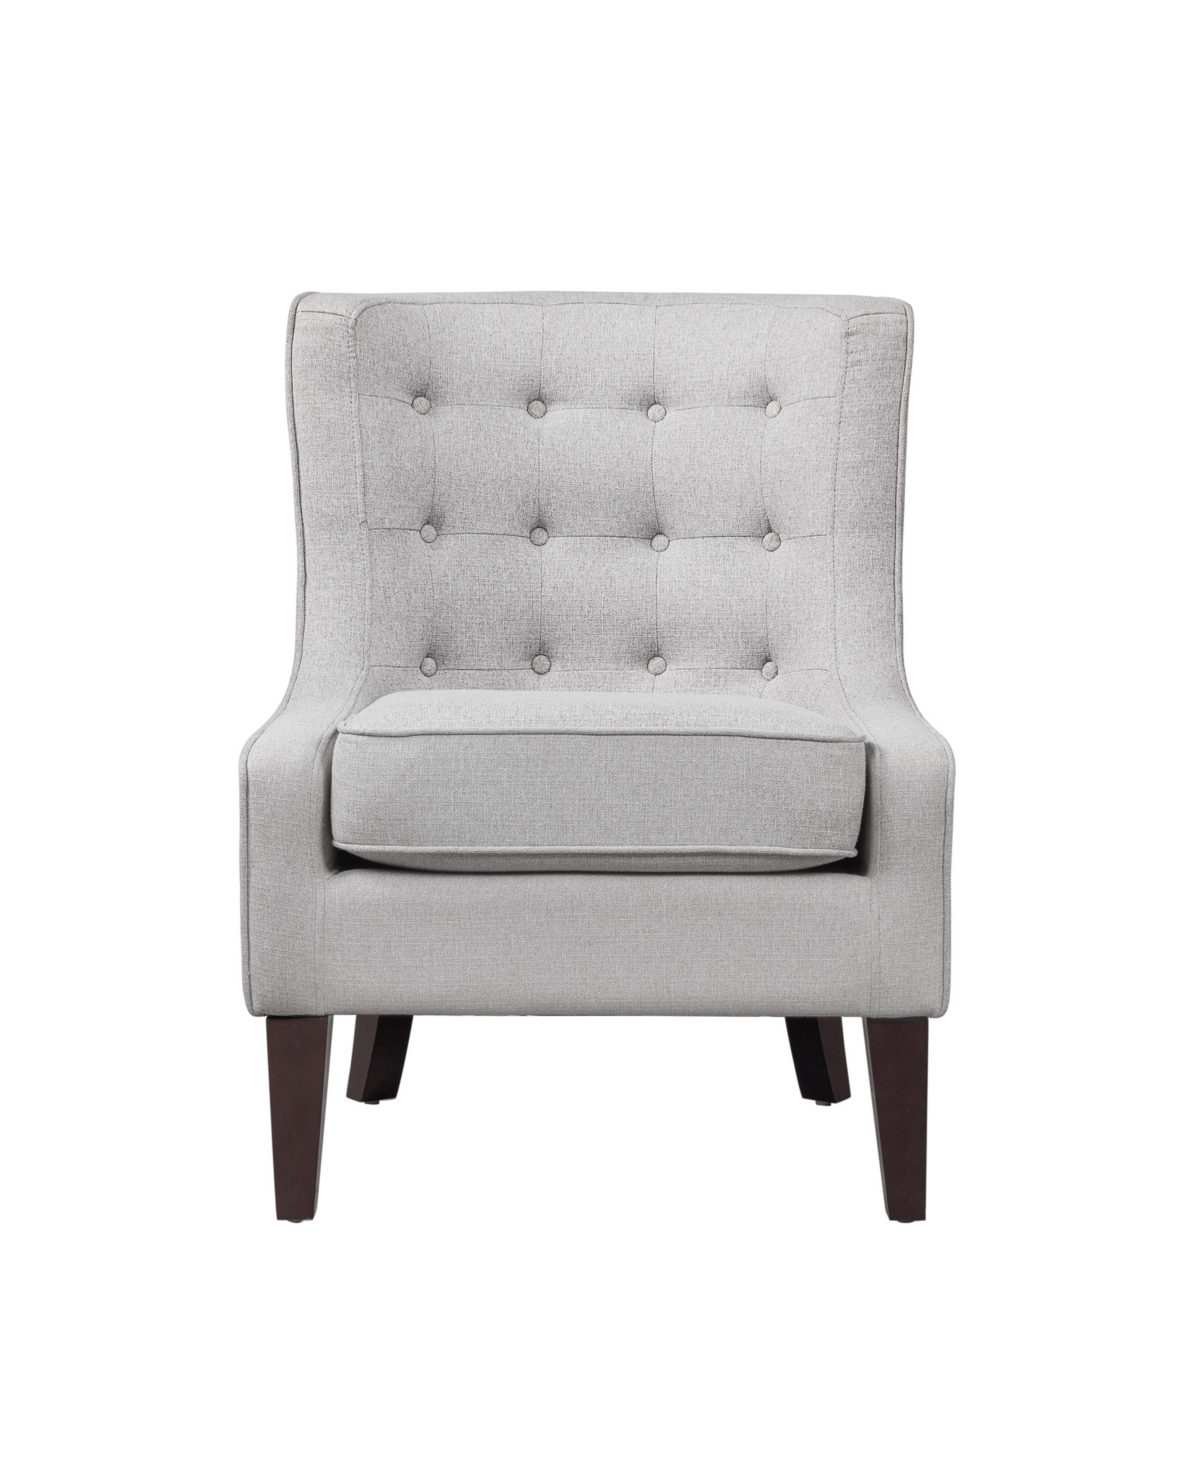 Lifestyle Solutions 36.8" Polyester Iona Accent Chair In Light Gray